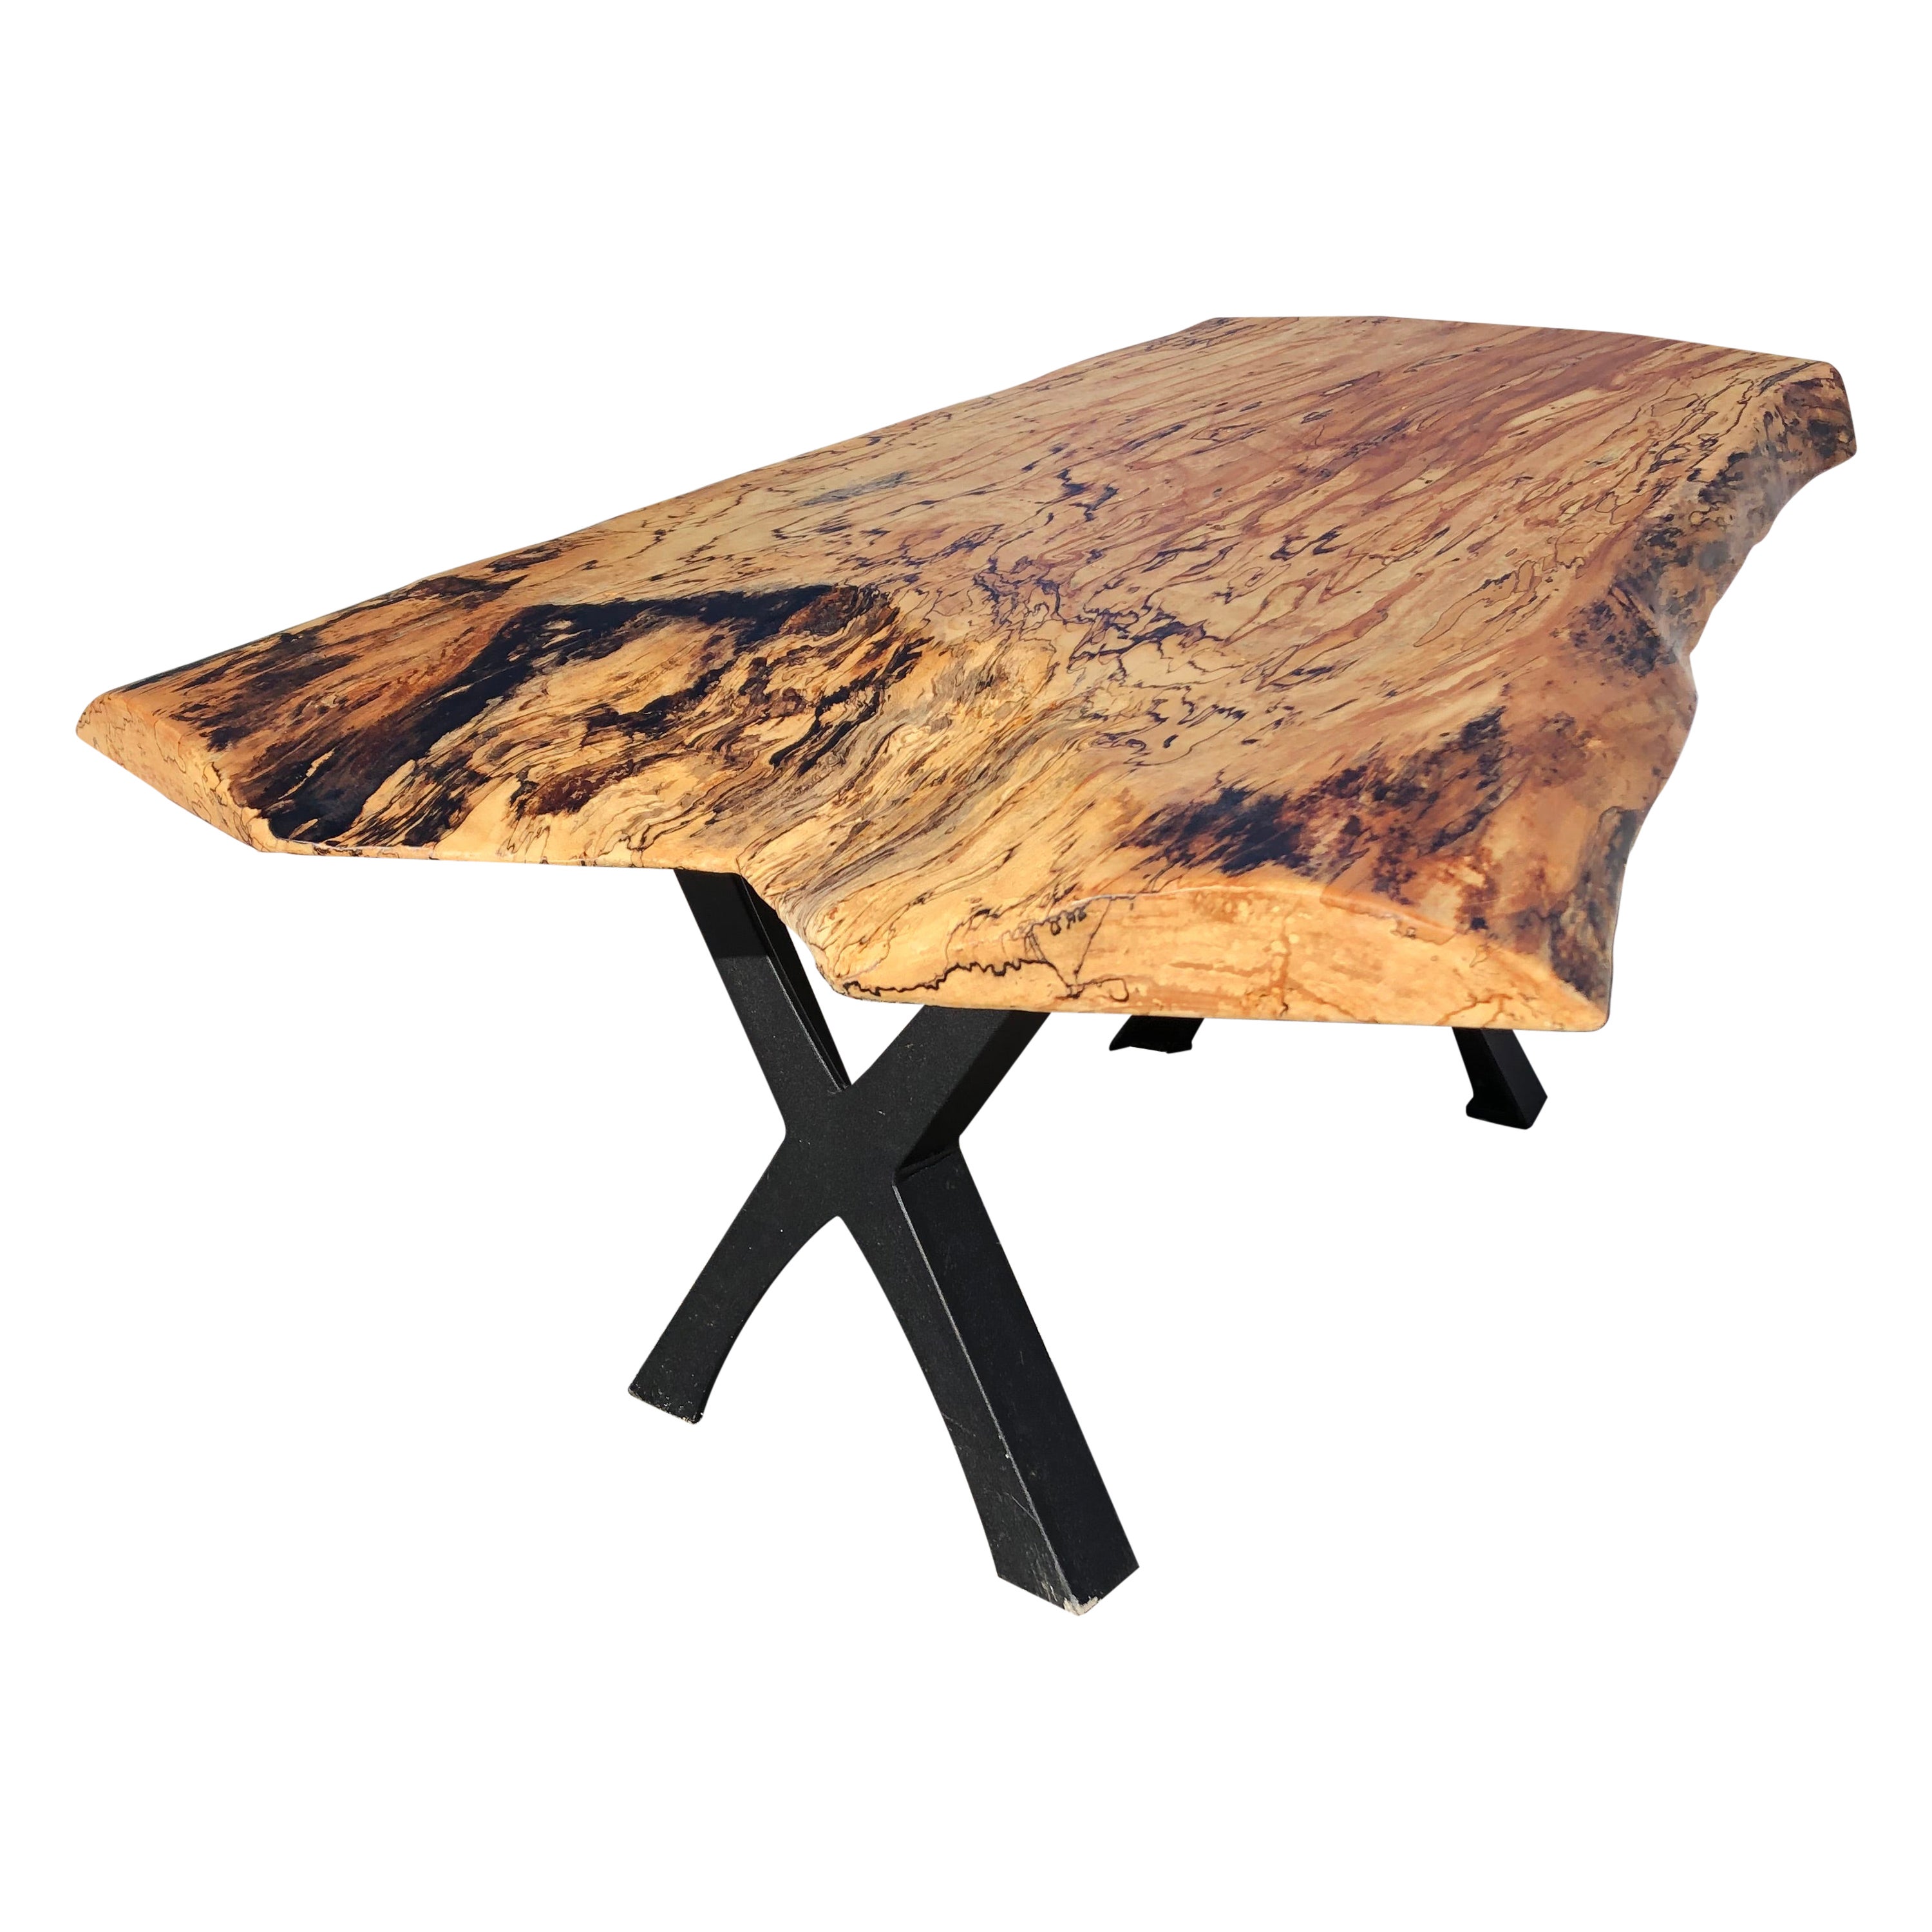 Beautiful Handcrafted Live Edge Maple Organic Modern Coffee Table For Sale